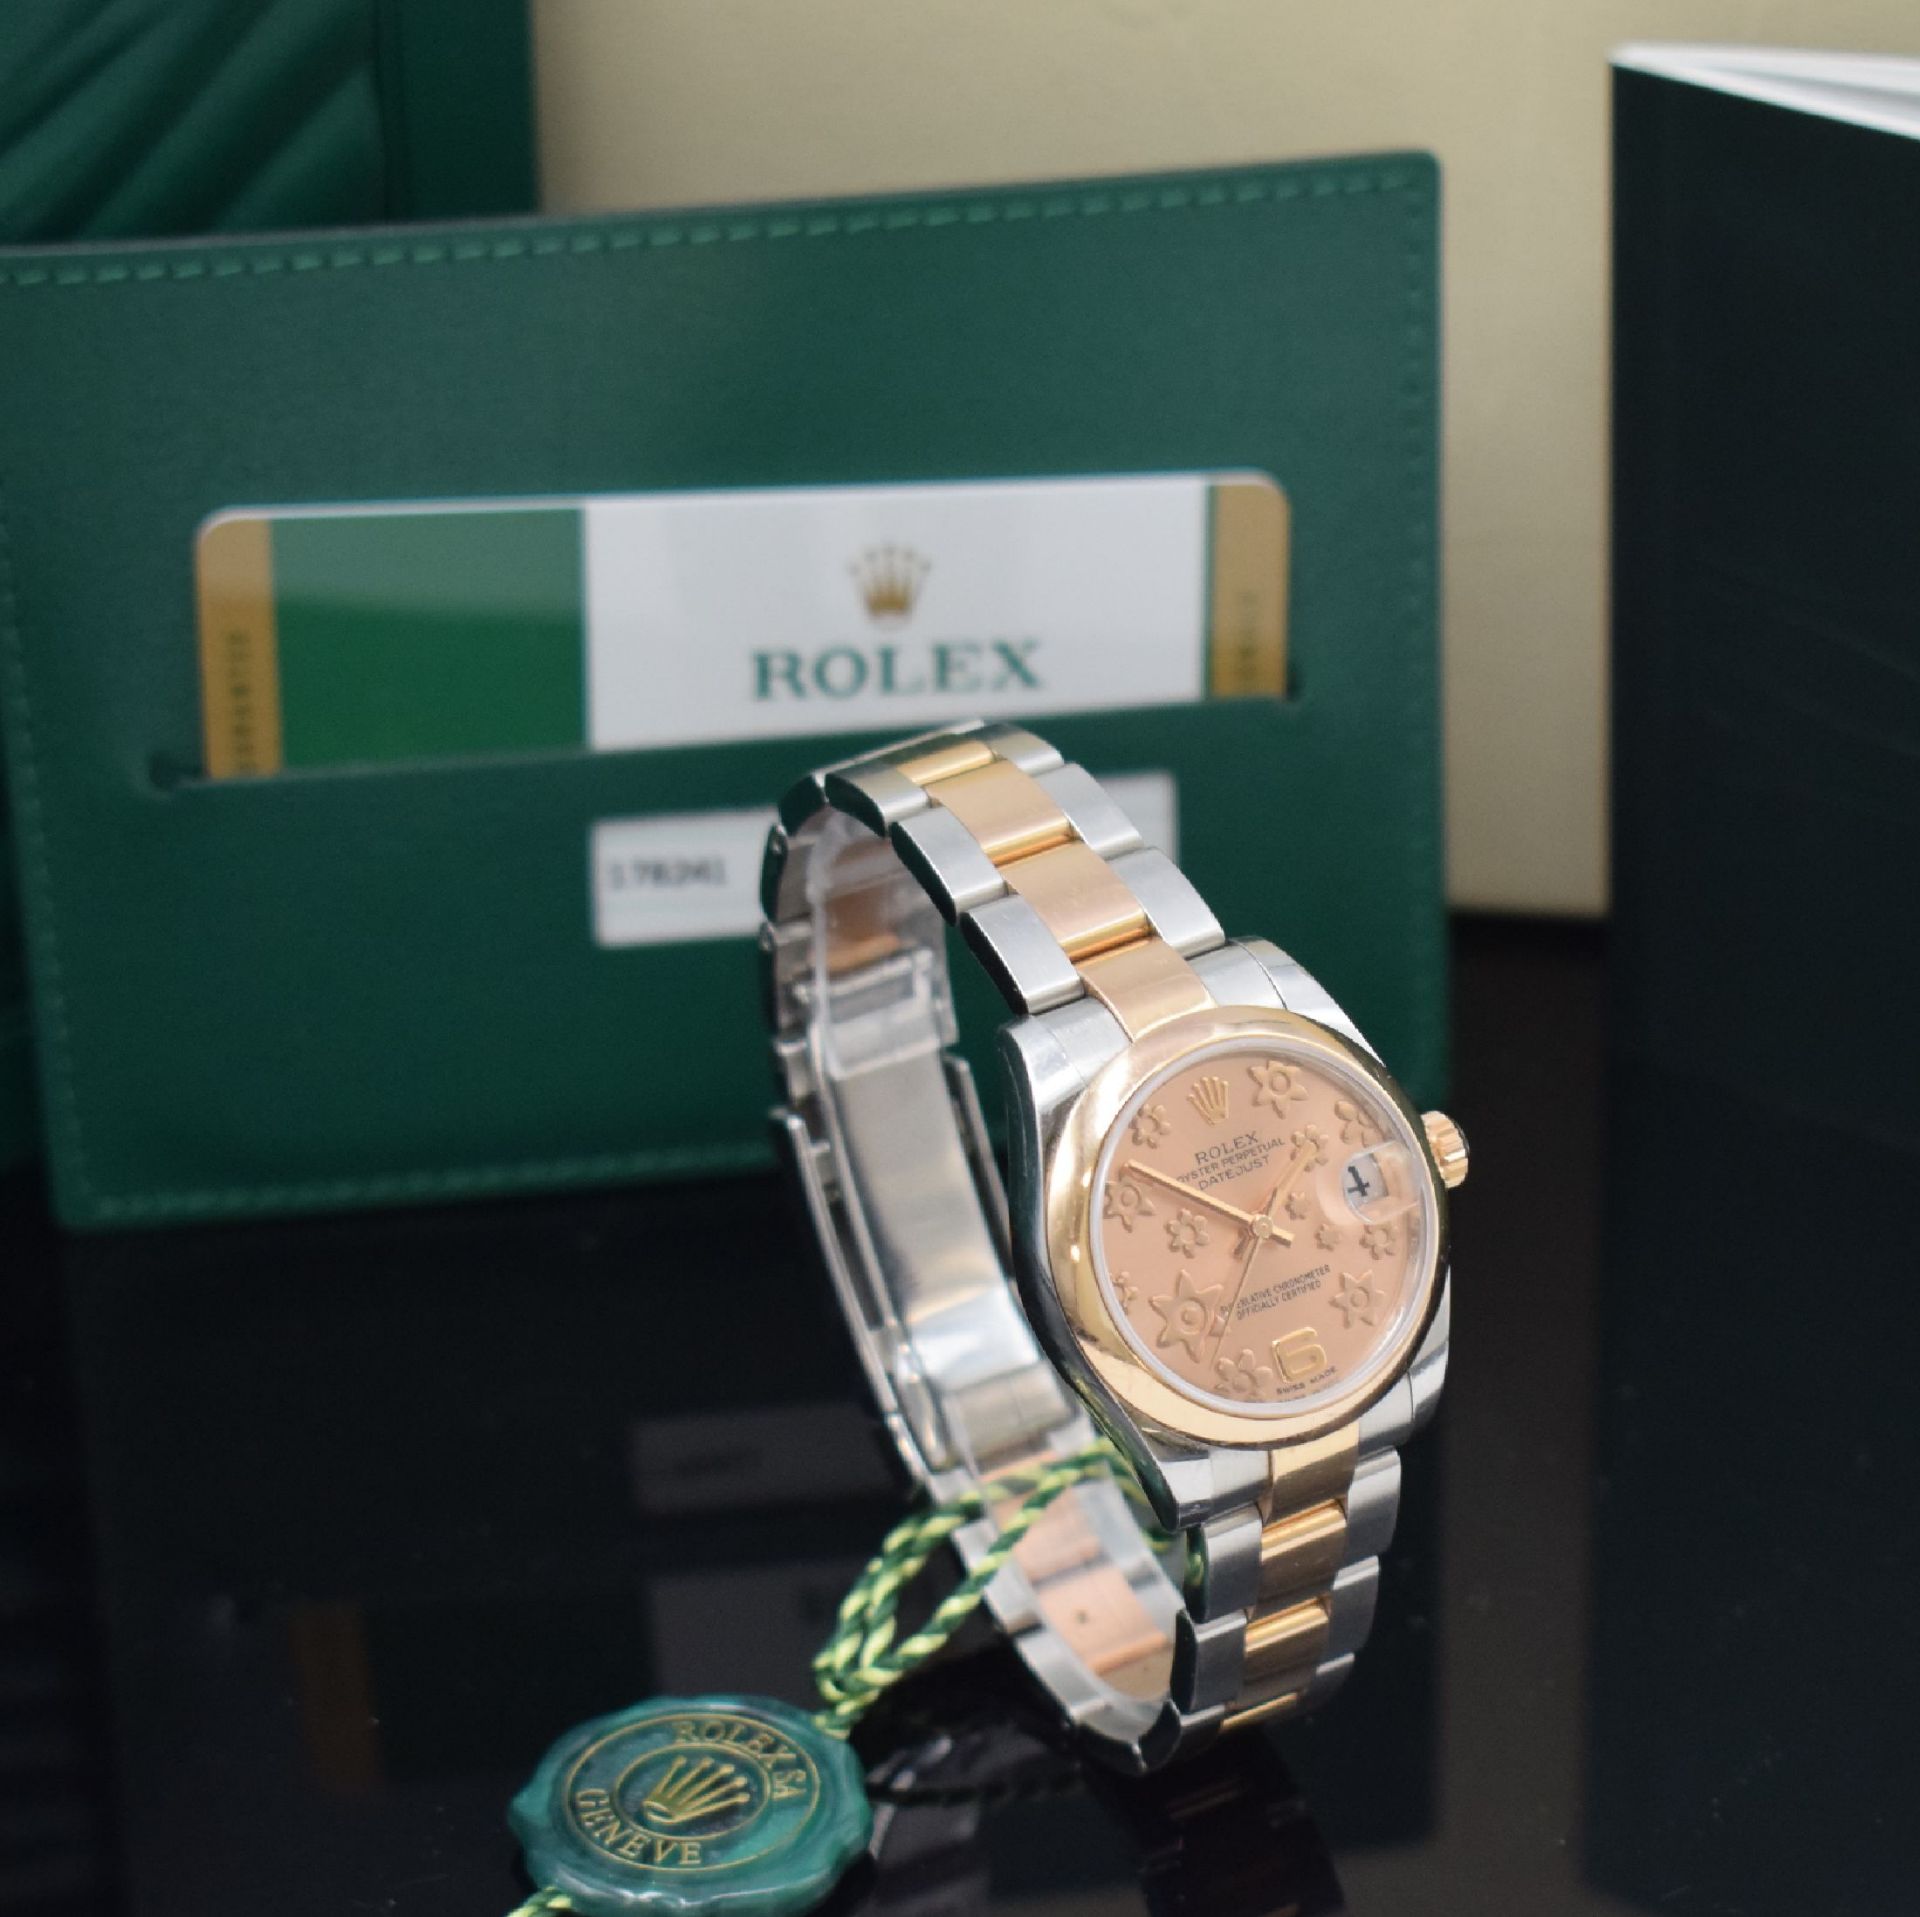 ROLEX Armbanduhr Oyster Perpetual Datejust Referenz - Image 4 of 7